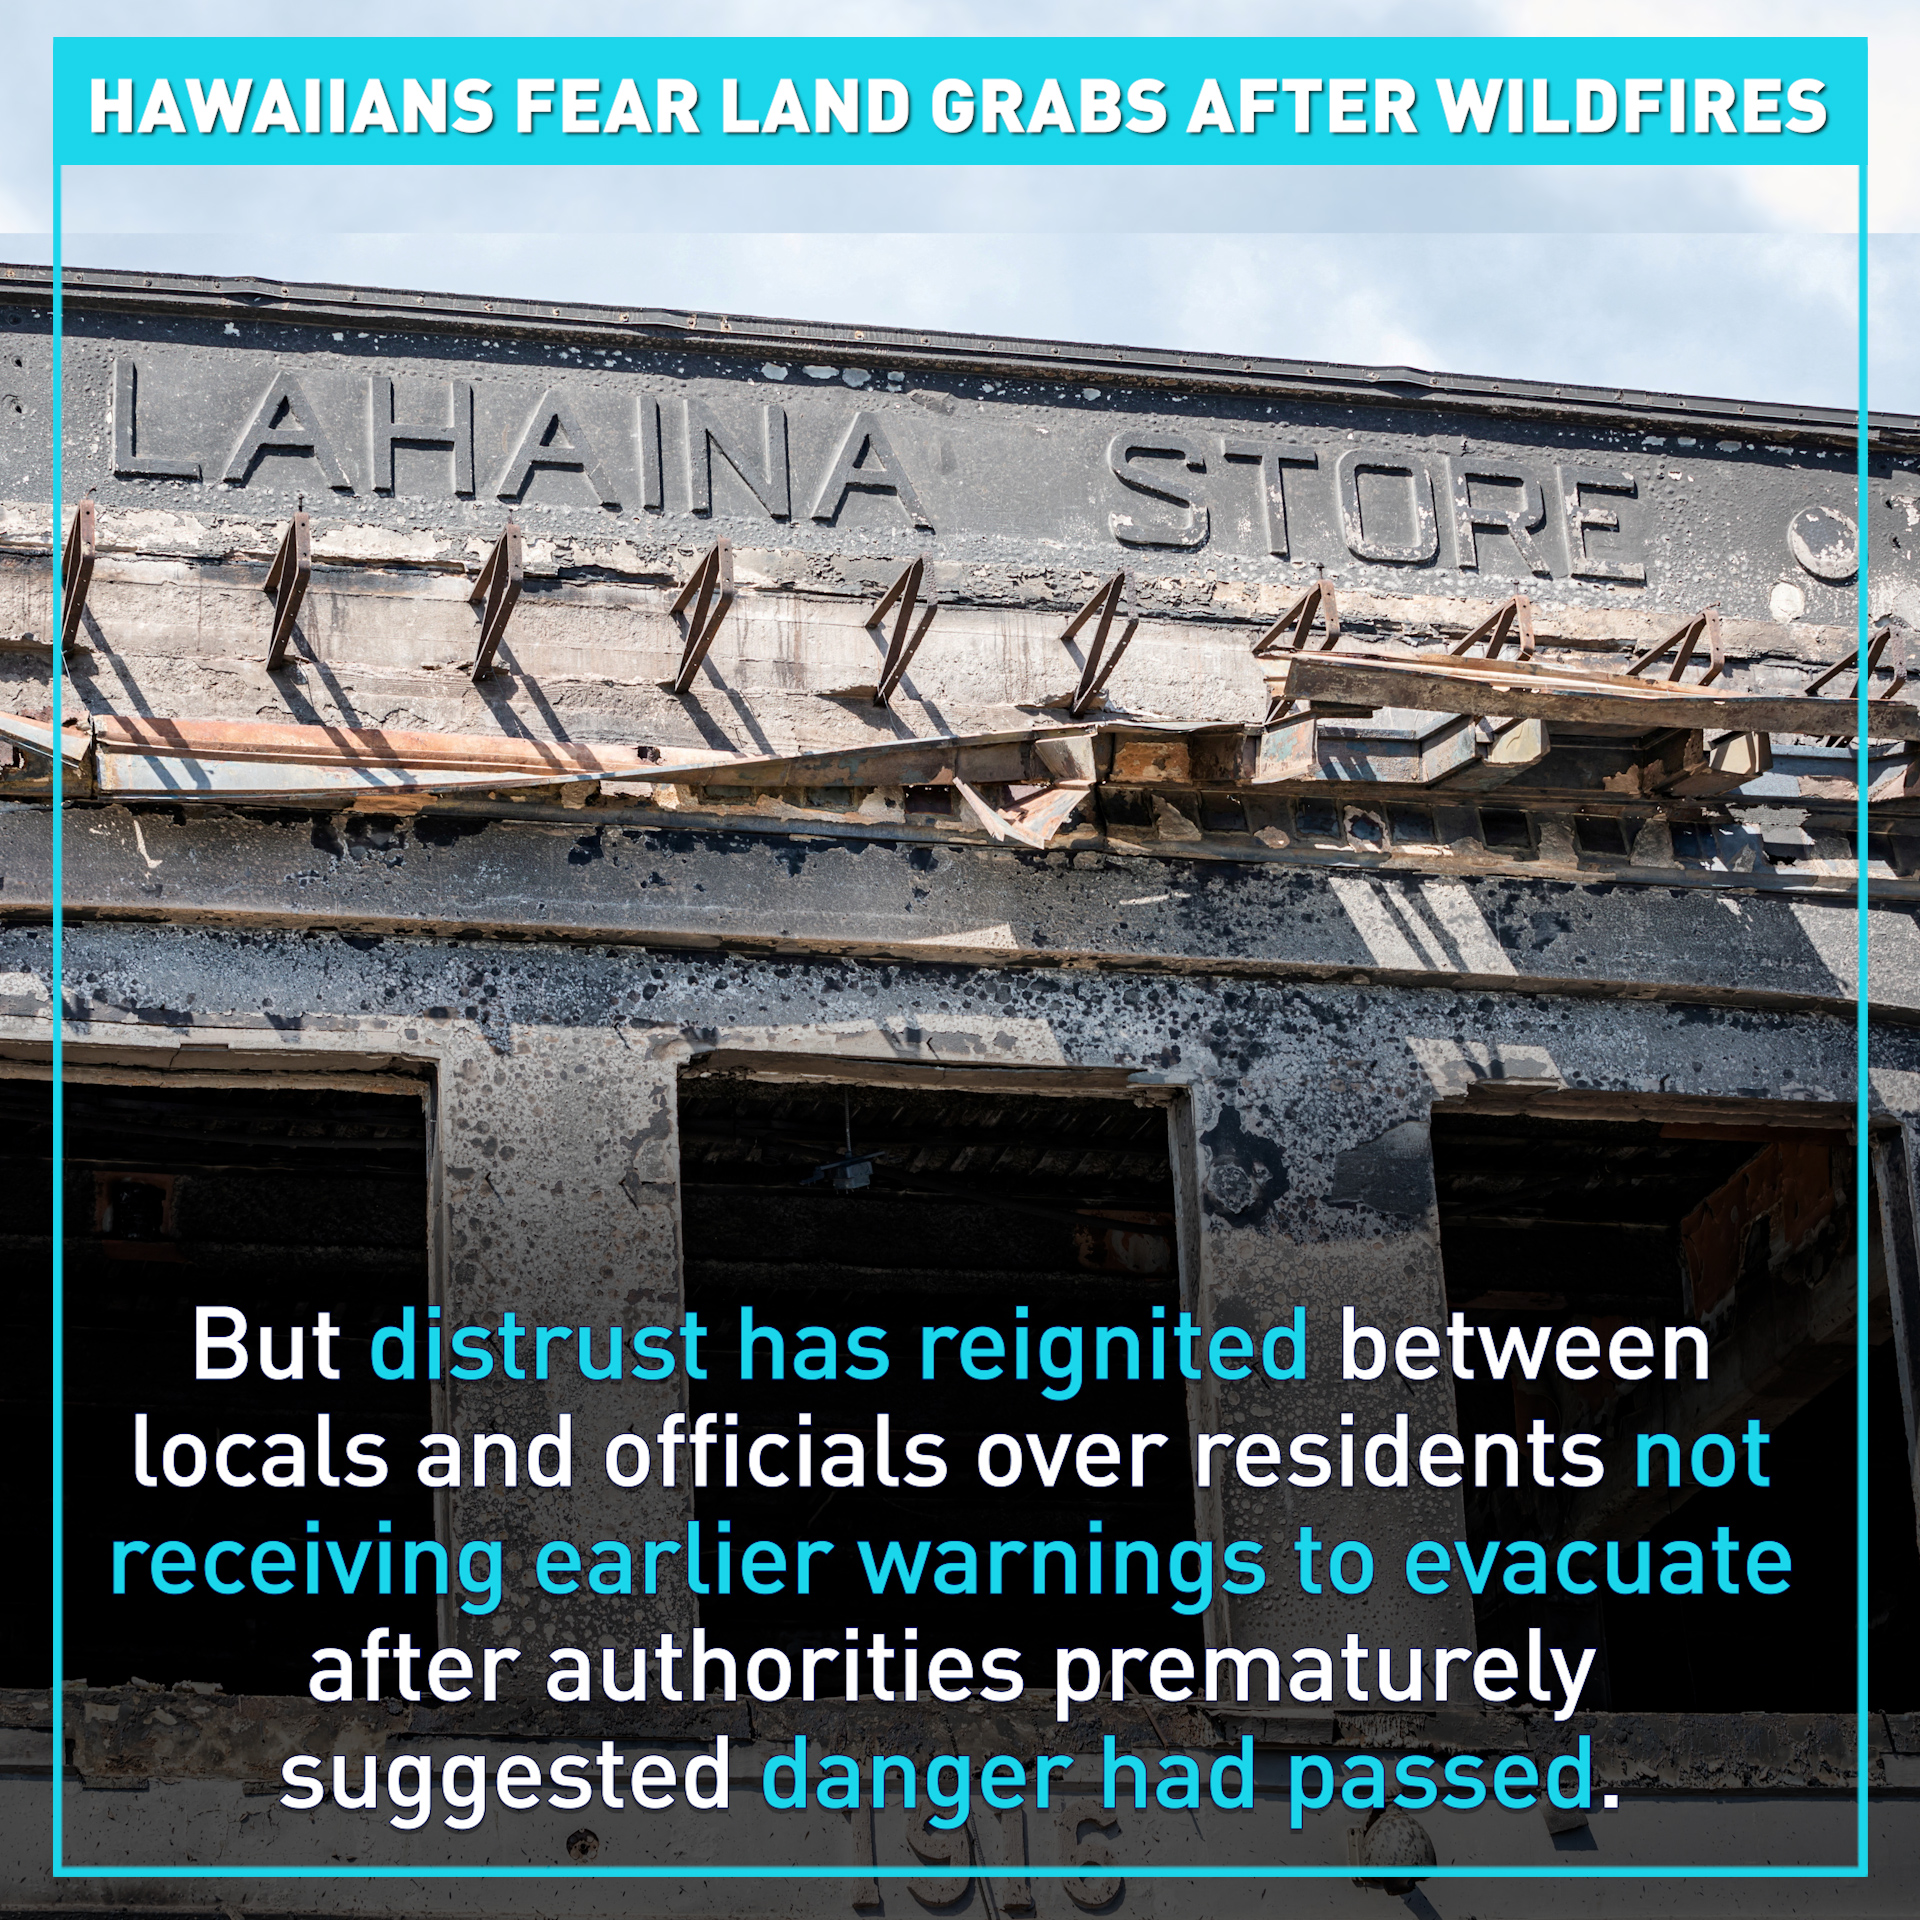 Hawaii's plan to prevent land grabs from wealthy mainlanders